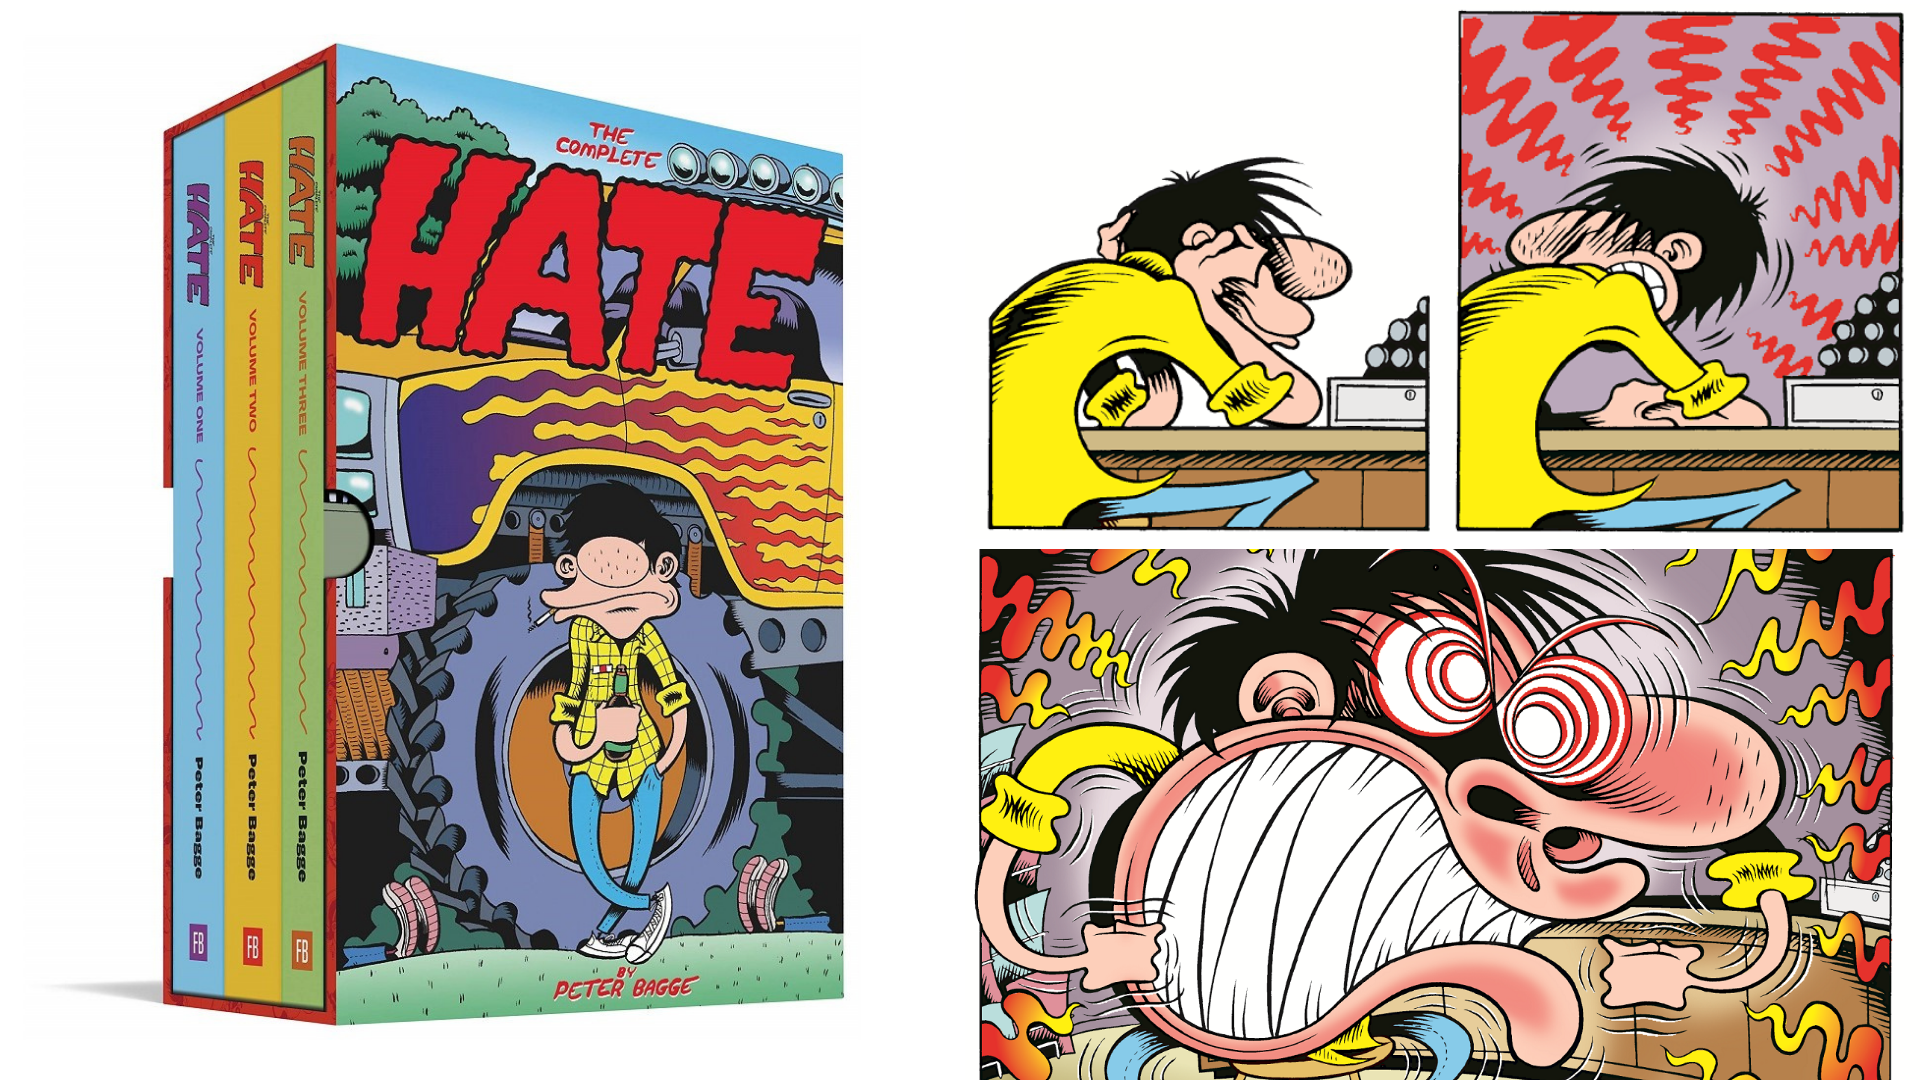 Artist Peter Bagge on the release of the archival collection of his bestselling comic book series some call the ultimate time capsule of Seattle's Grunge era.